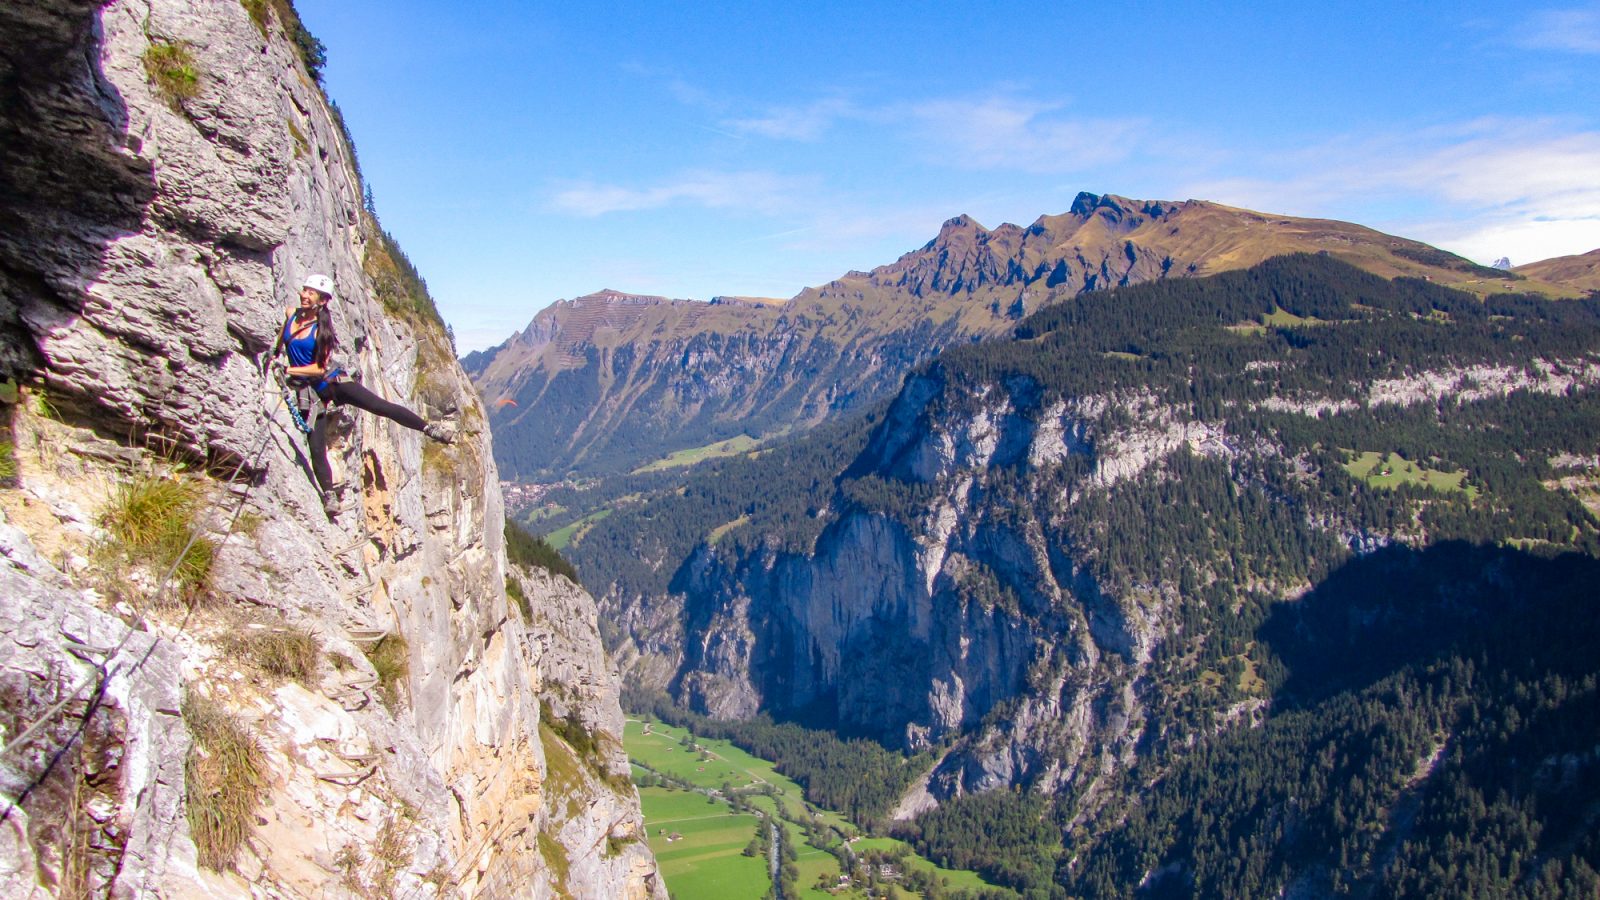 Via Ferrata Murren to Gimmelwald, Switzerland: One Insane Alpine Adventure! What to expect on the via ferrata, what to pack, what equipment you'll need and where to rent it. Do you need a guide? How difficult is it? And more! #viaferrata #murren #gimmelwald #swissalps #switzerland #lauterbrunnenvalley #jungfrau #hiking #rewilding #mywanderlustylife